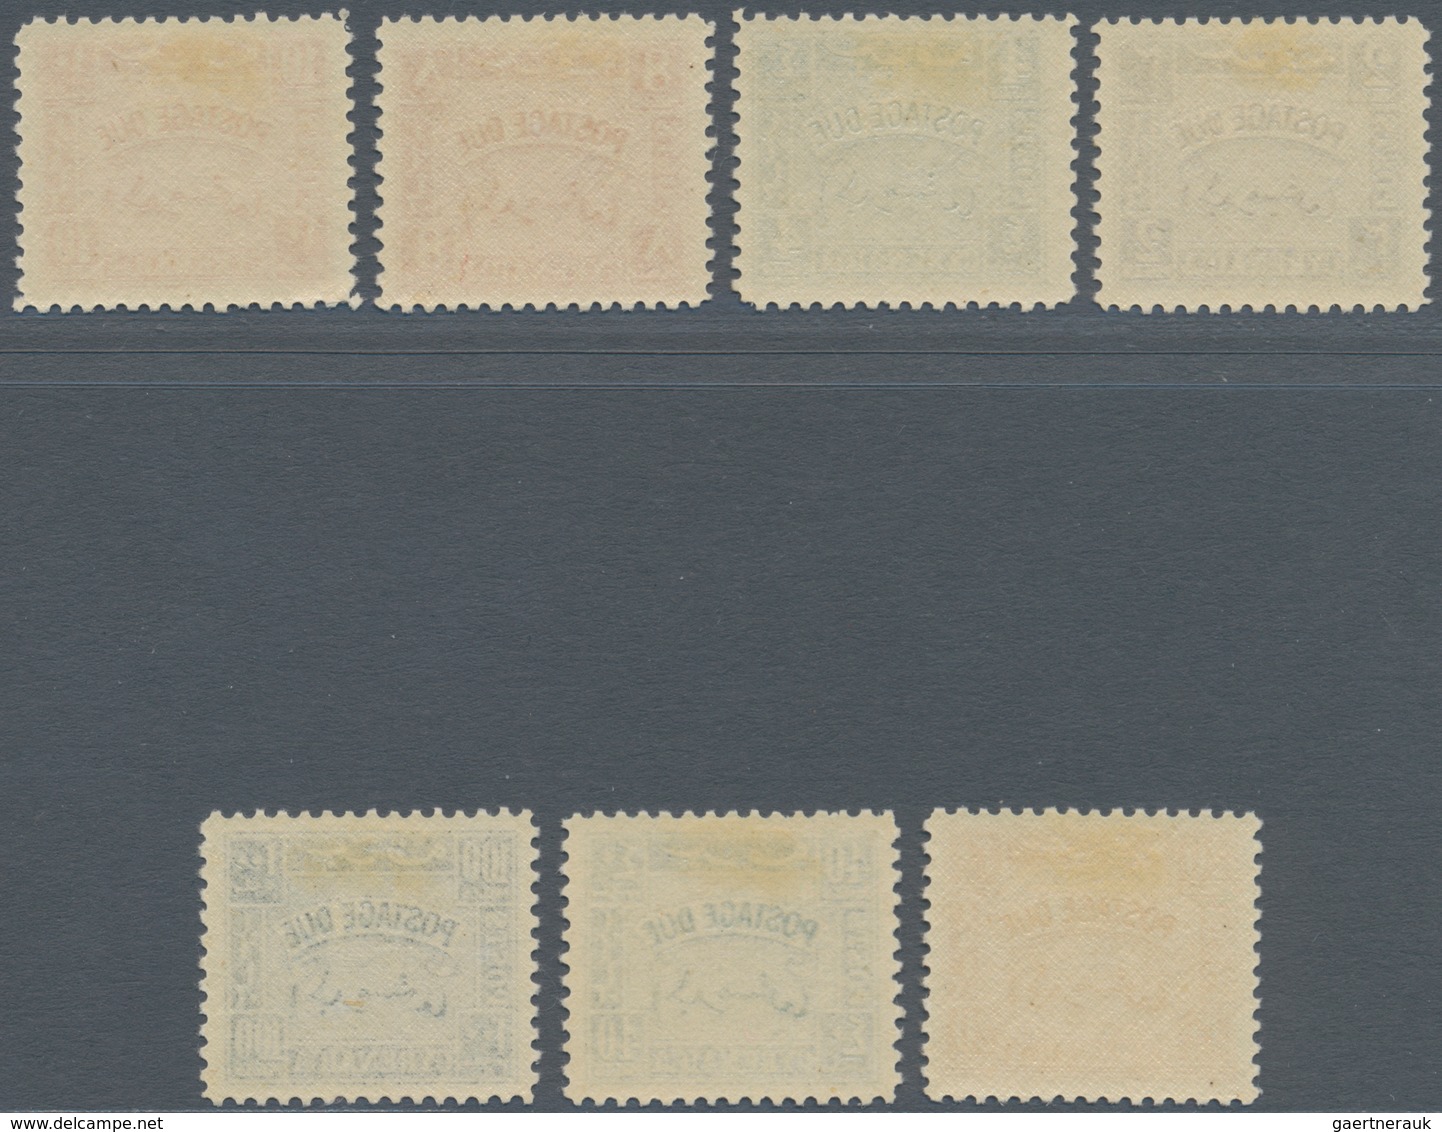 Cyrenaica - Portomarken: 1950, Postage Dues Complete Set Of Seven, Mint Lightly Hinged And Scarce, S - Cirenaica